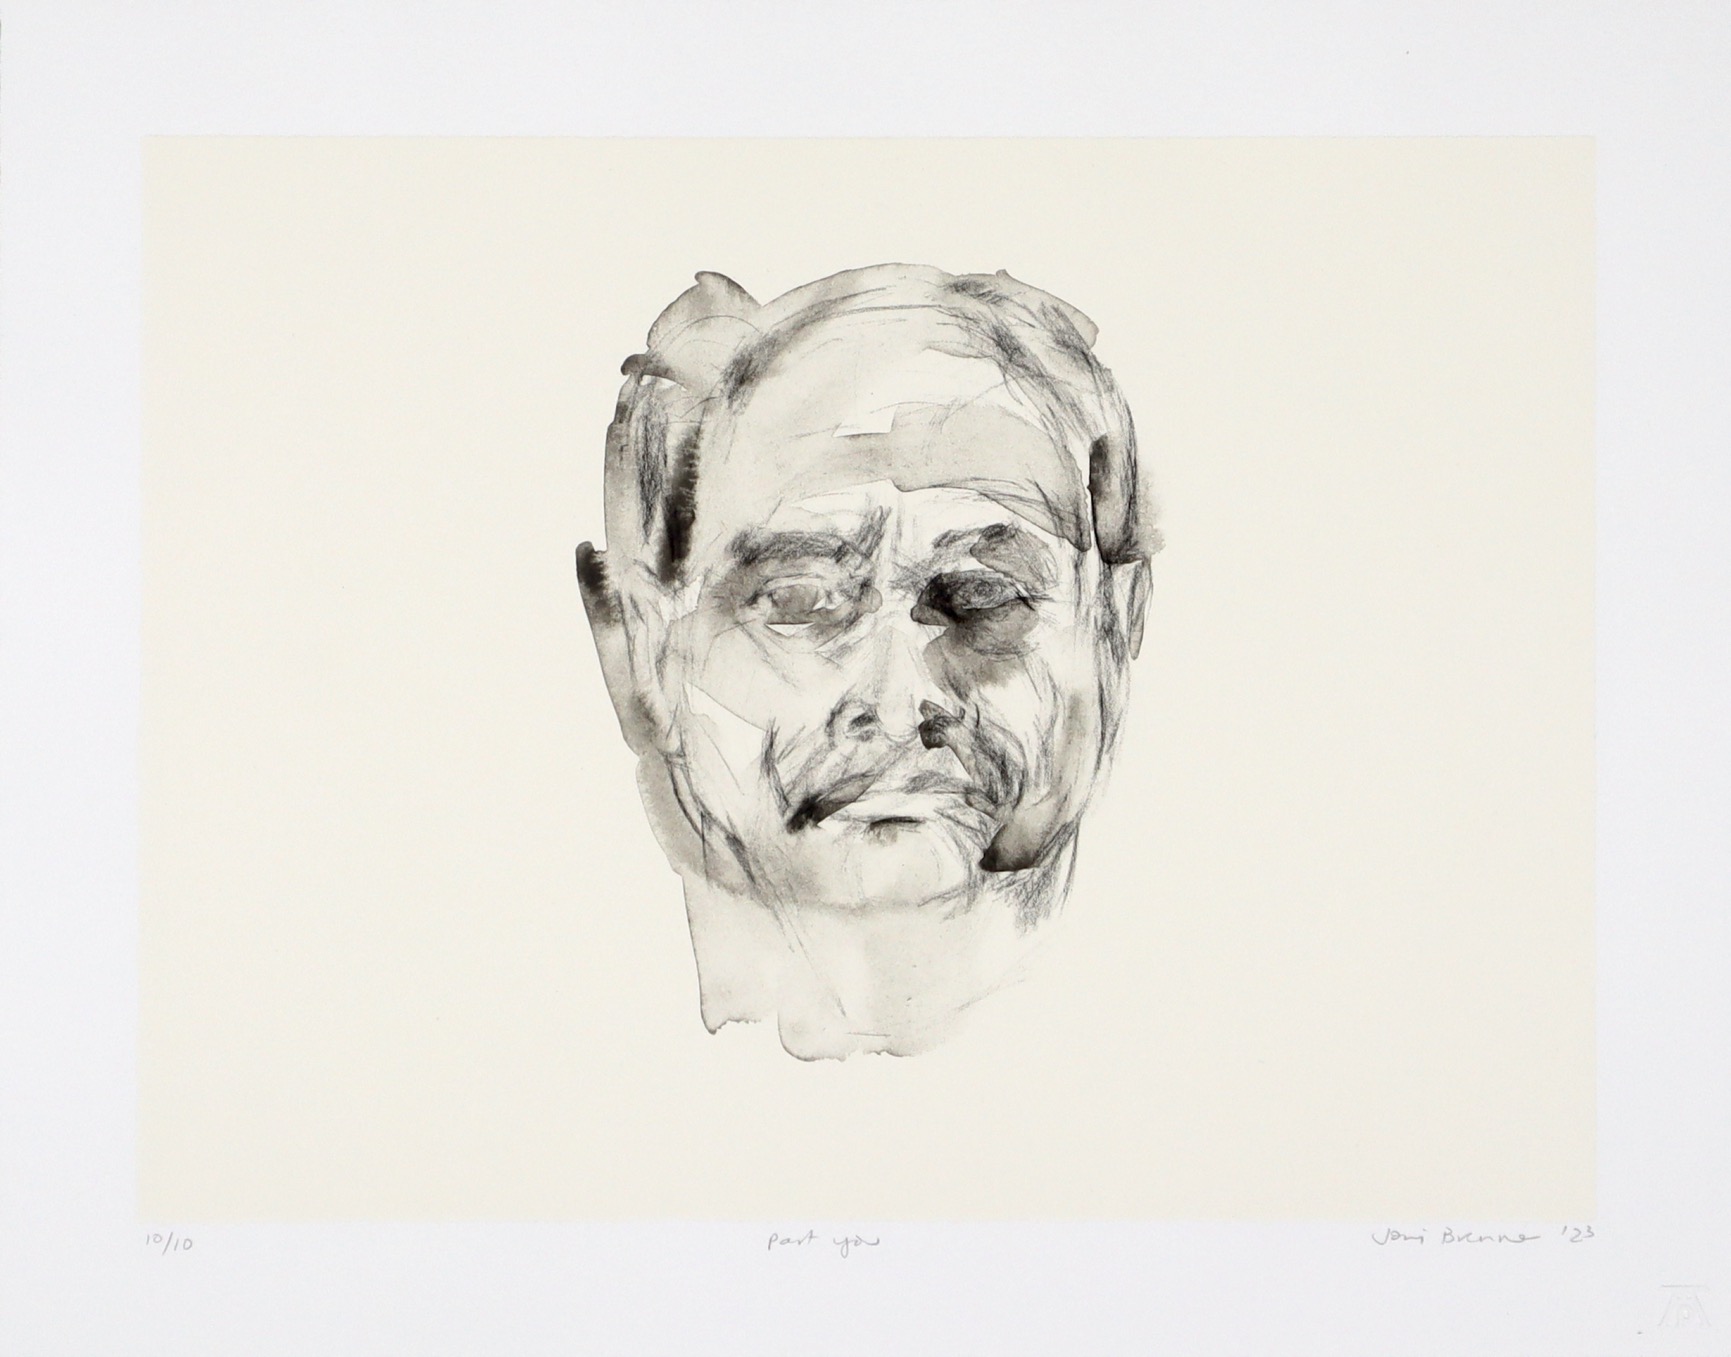 Joni Brenner Part you lithograph